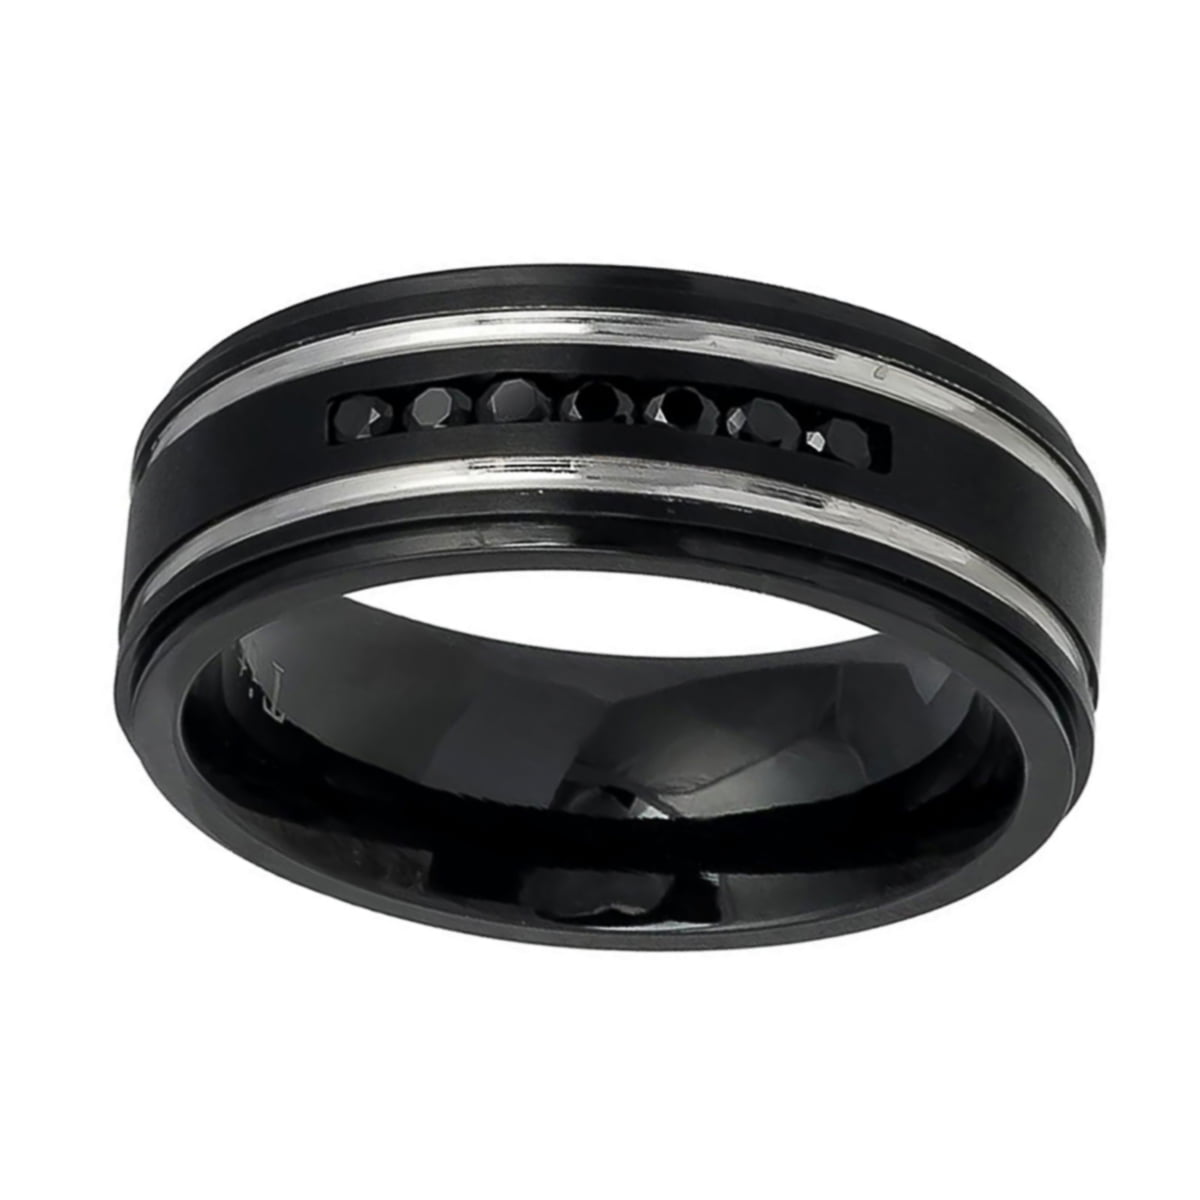 Details about   Wow Jewelers 8mm Silver/Black/Rose Gold Tungsten Carbide Rings for Men Women Wed 